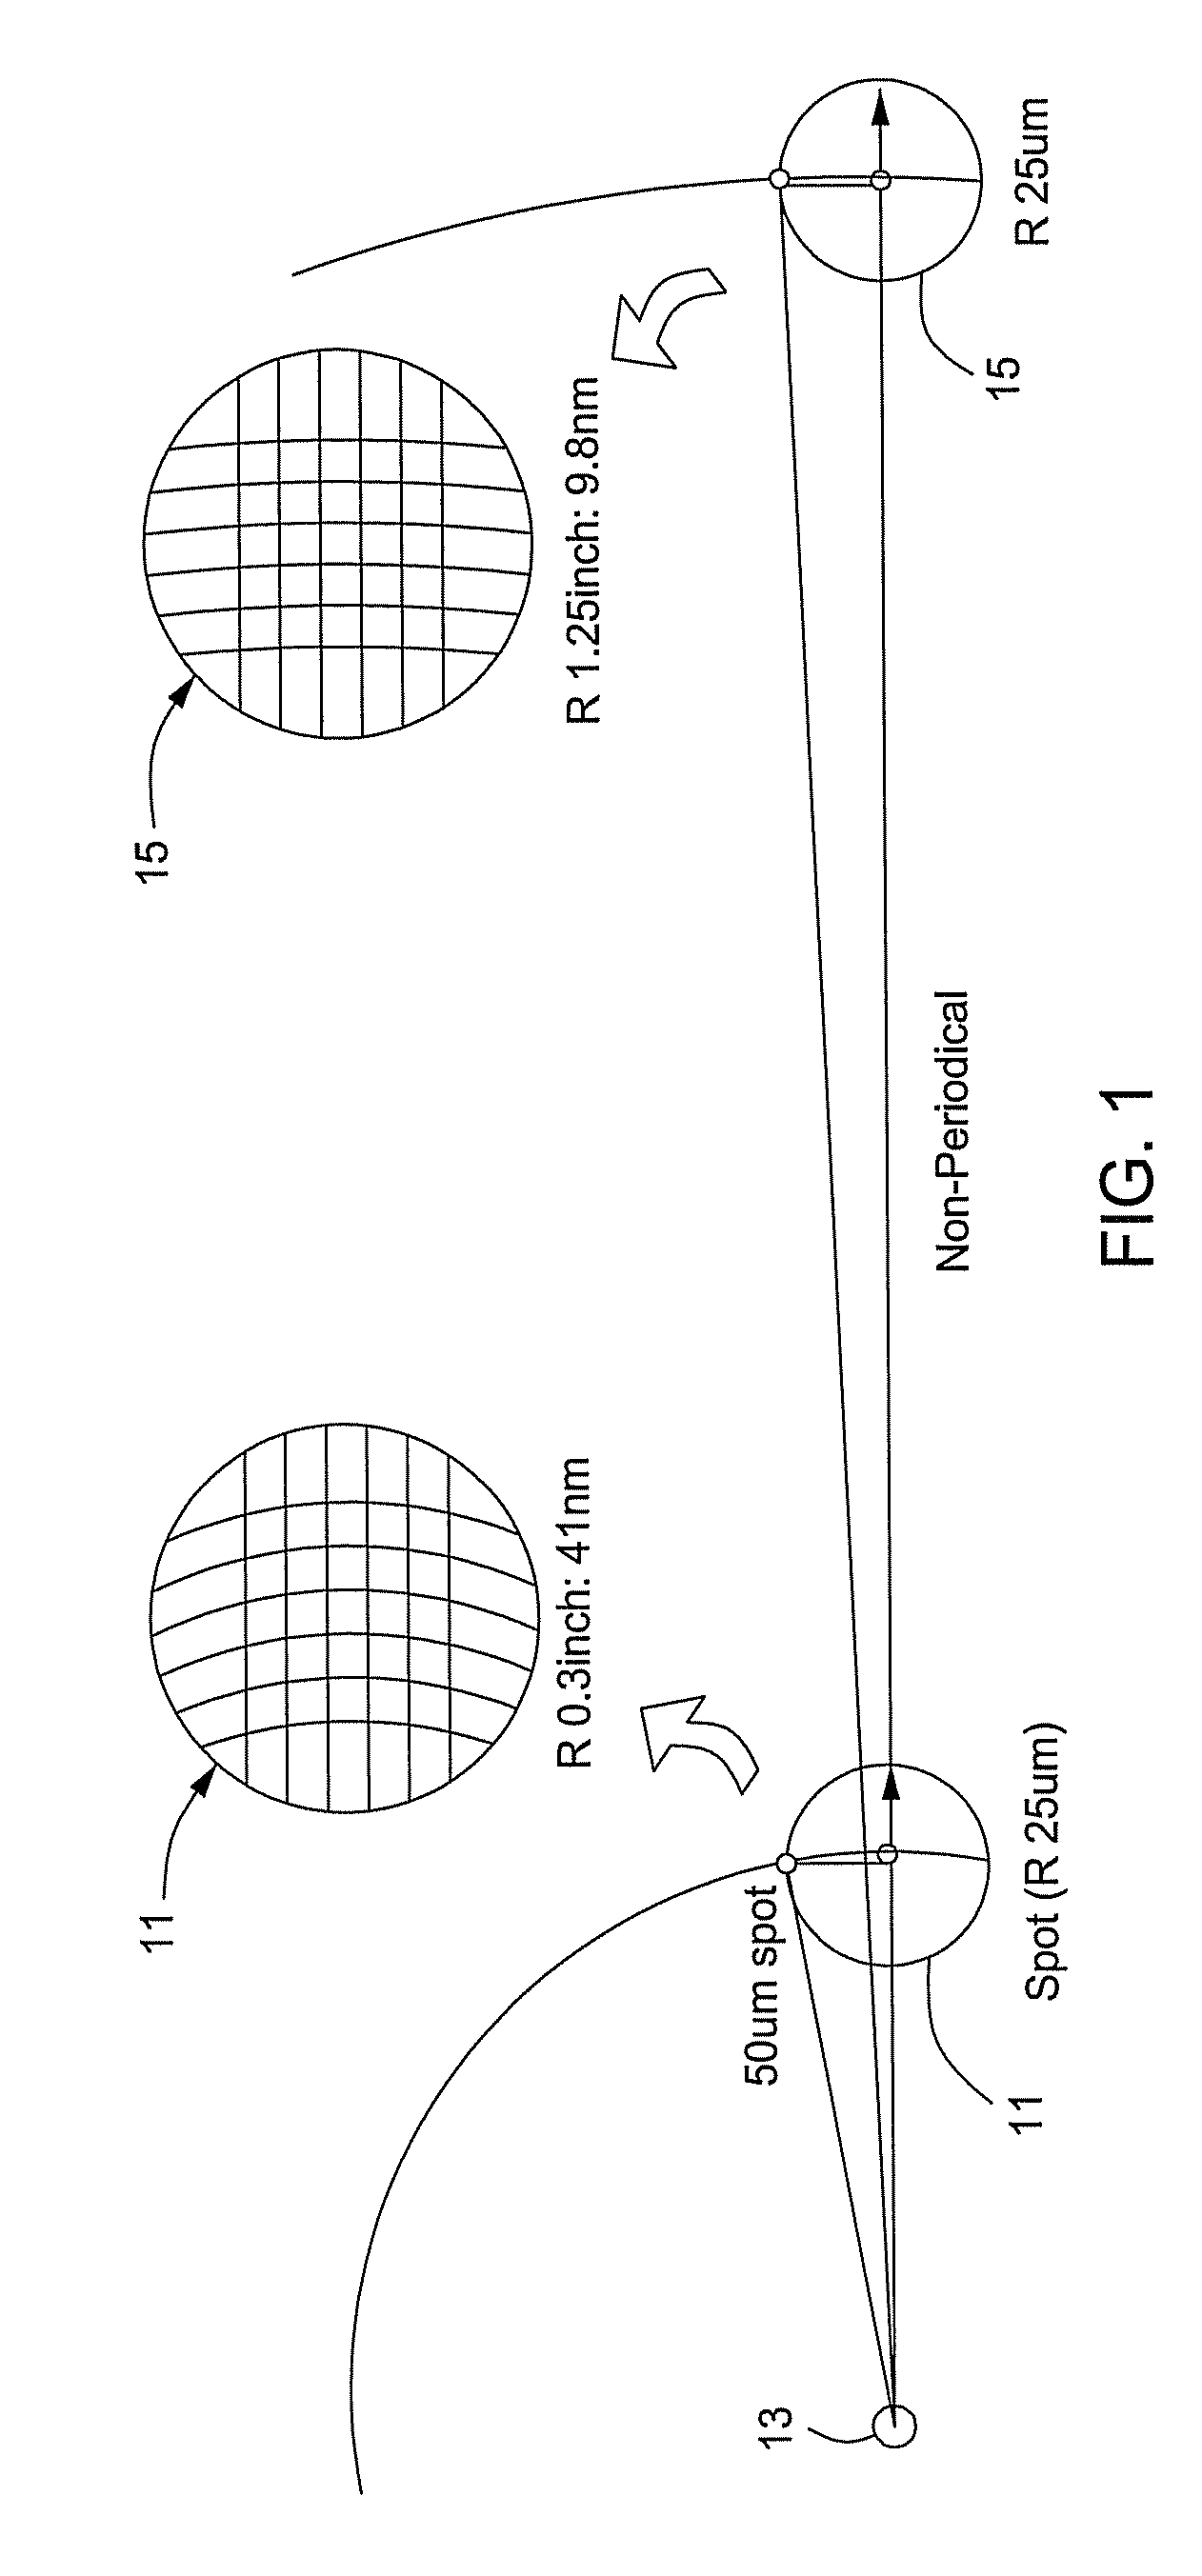 System, method and apparatus for performing metrology on patterned media disks with test pattern areas